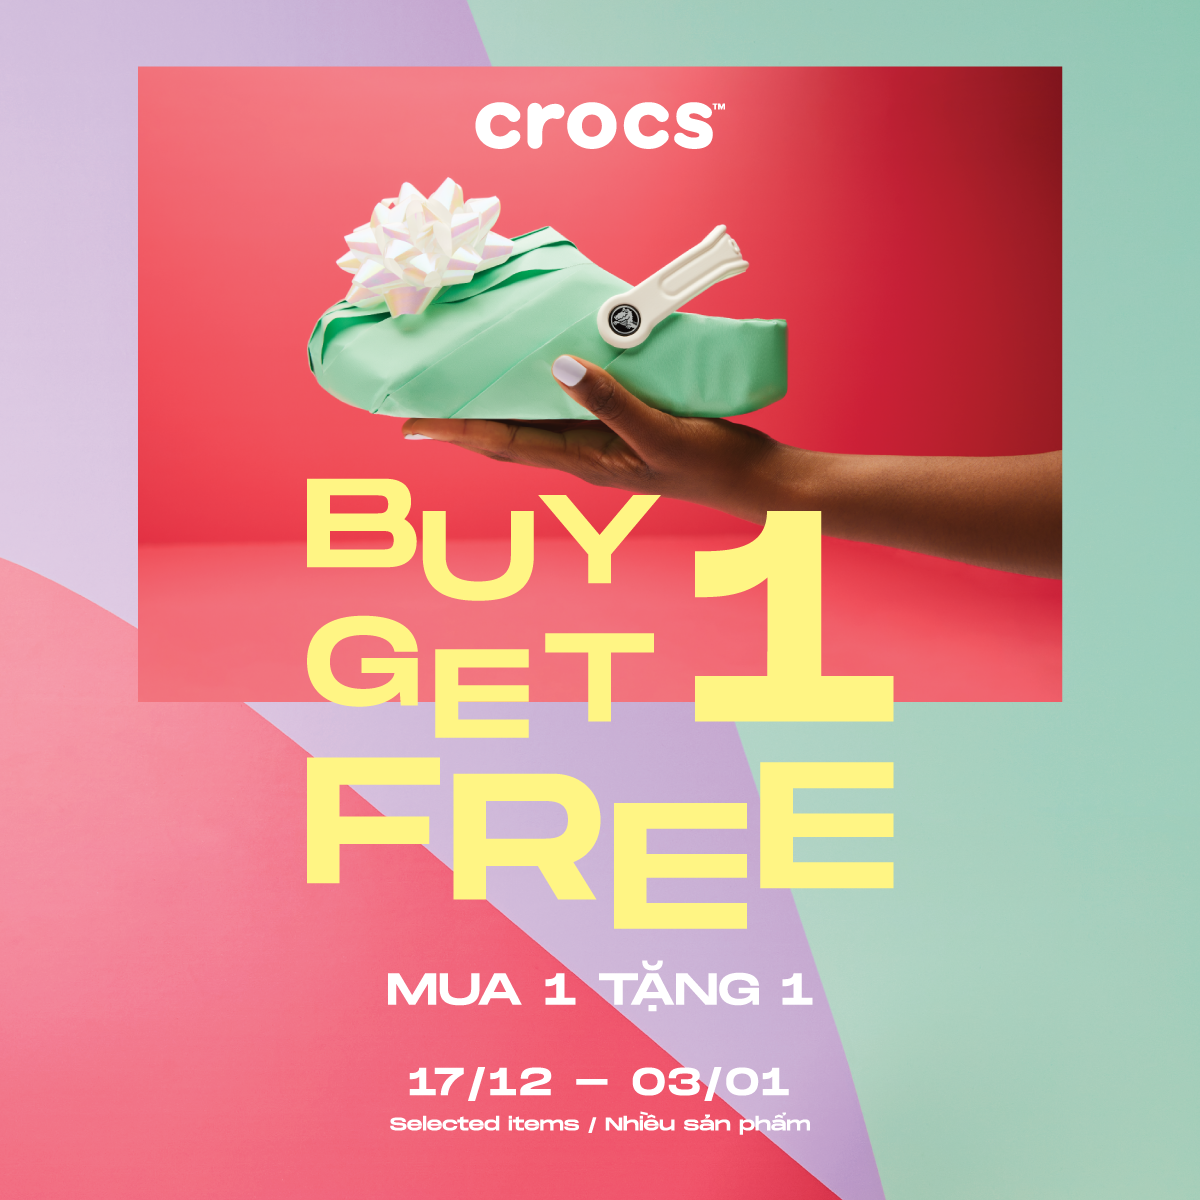 ⚡️ END OF SEASON SALE, BUY ONE GET ONE FREE WITH CROCS⚡️